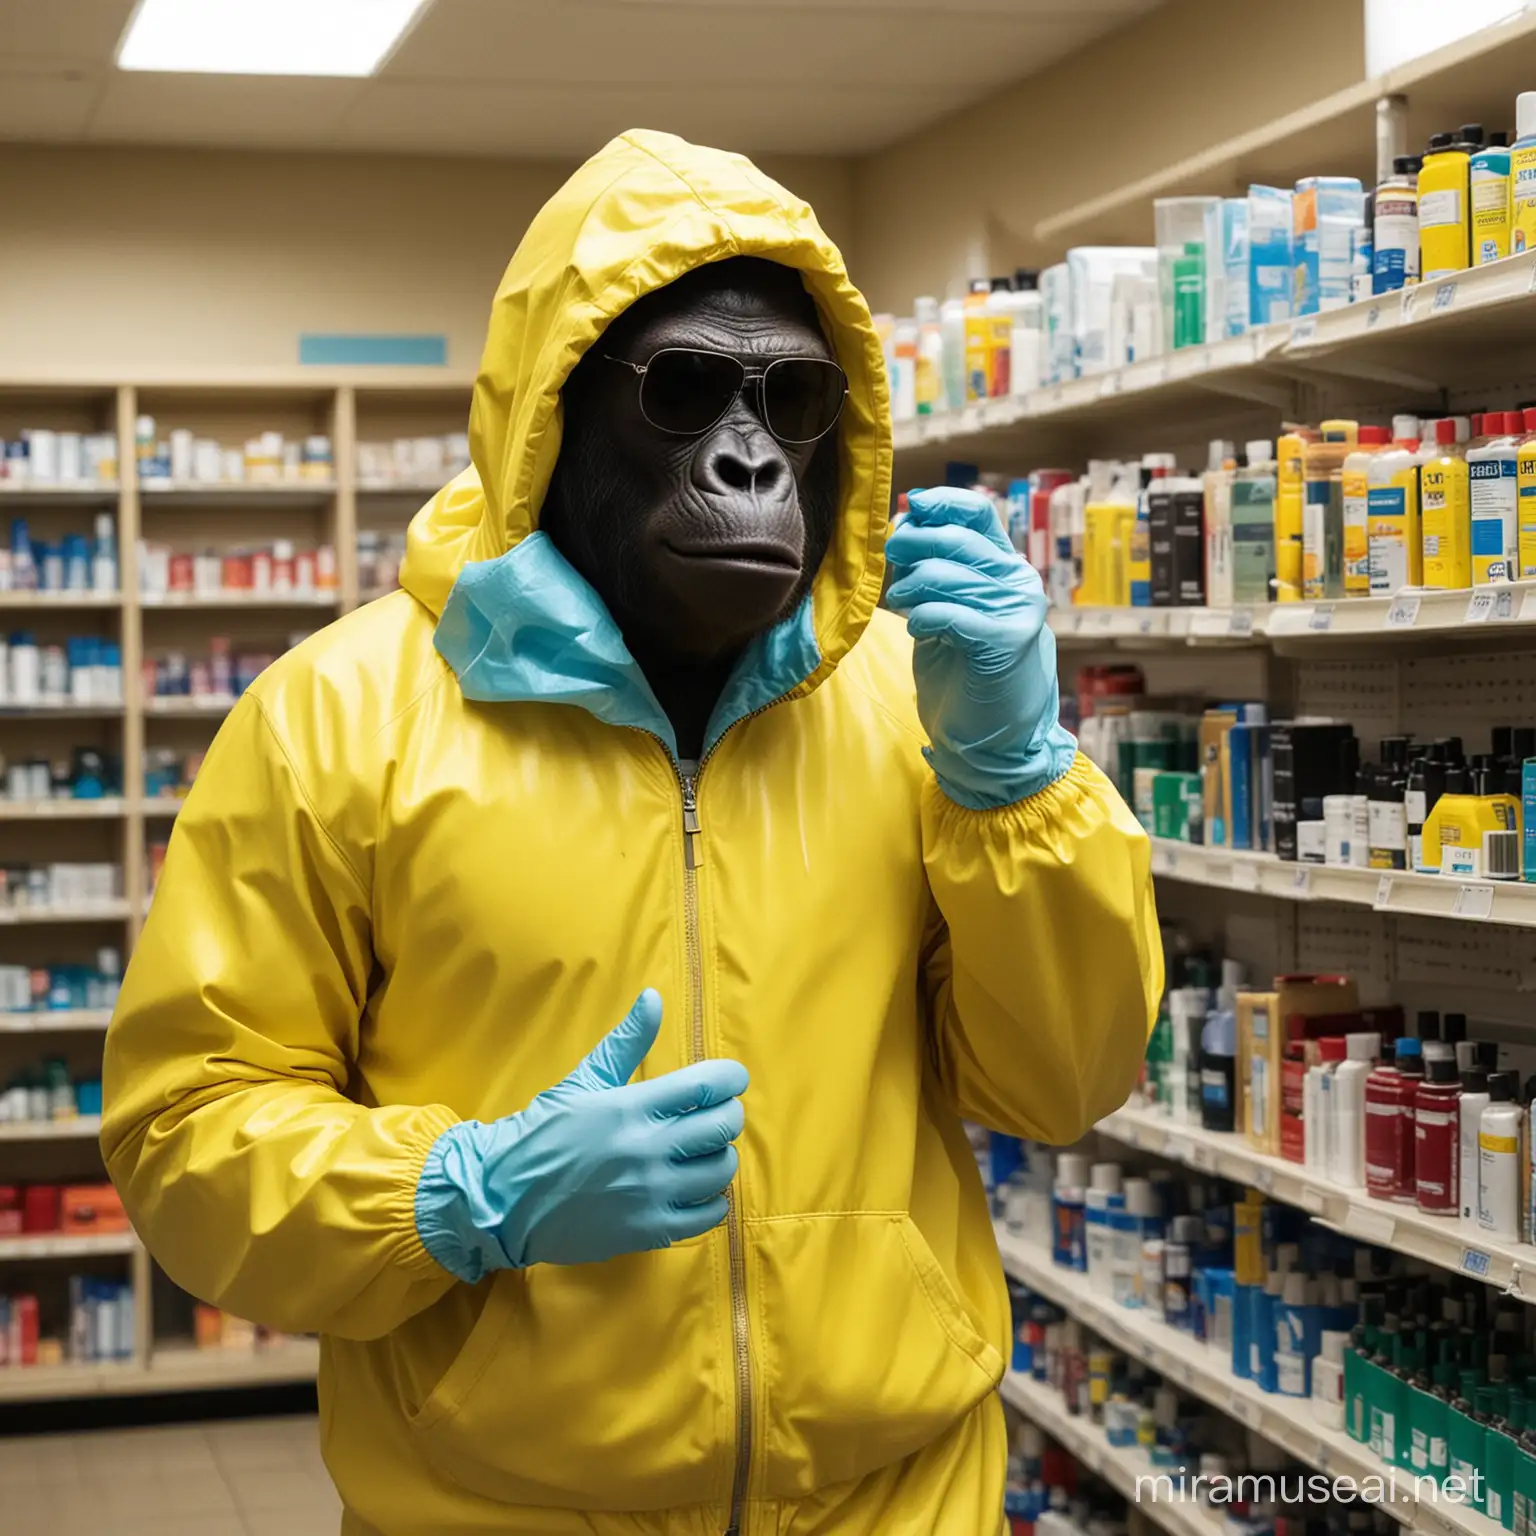 Gorilla wearing yellow tracksuit like in Breaking Bad tv series, standing inside a pharmacy. He is also wearing sunglasses and a red oxygen mask. He wears light blue latex gloves and a yellow hoodie is covering his head